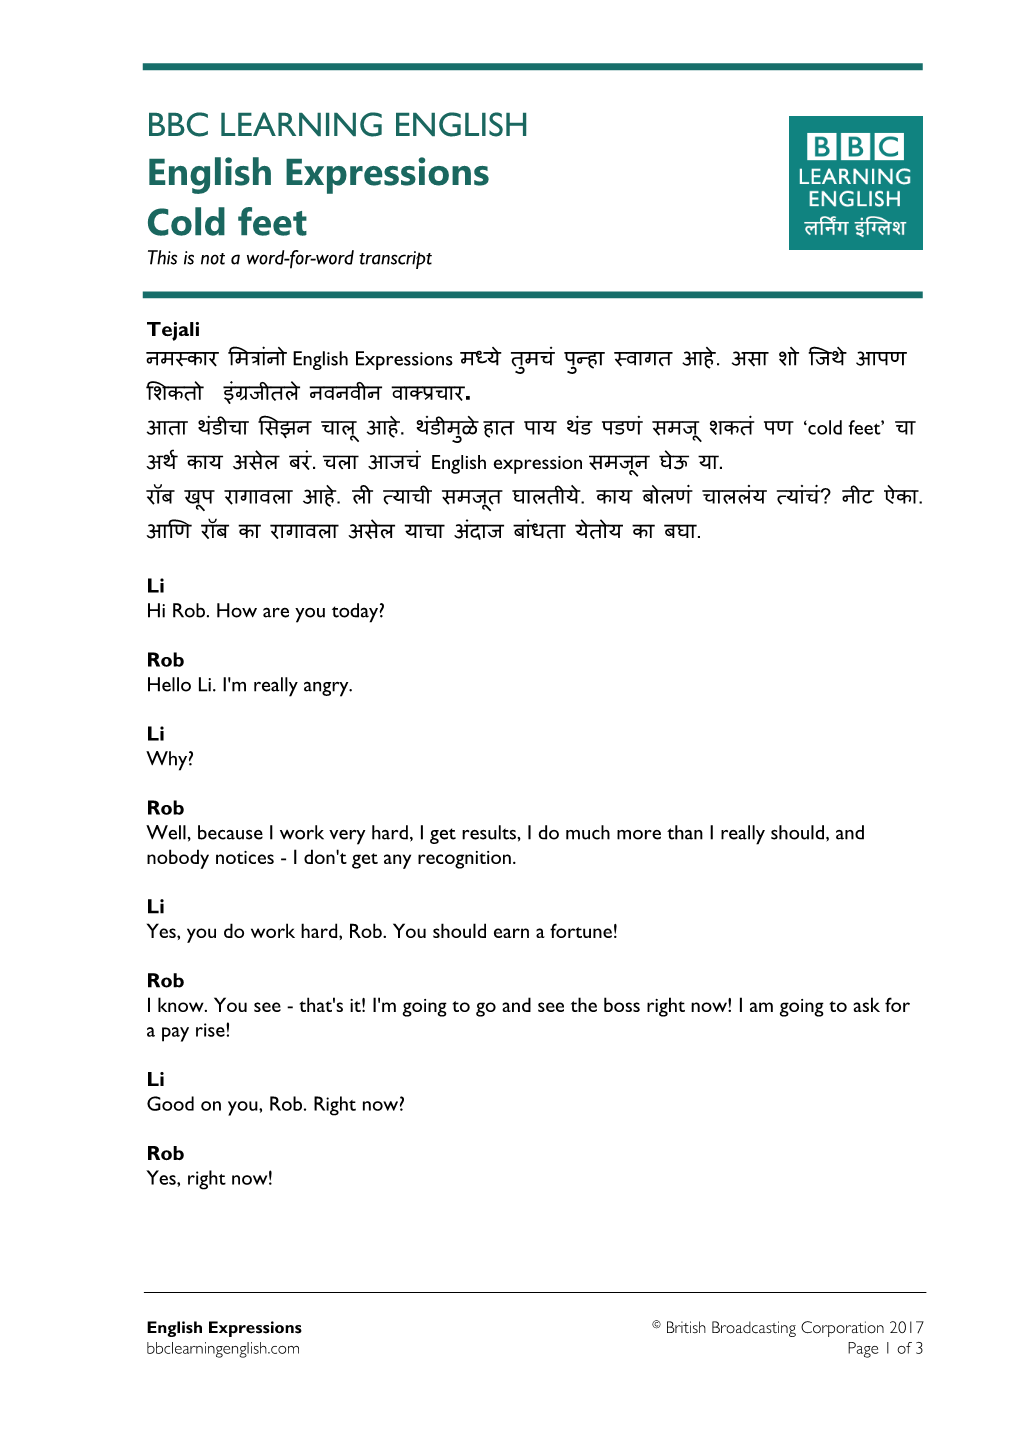 English Expressions Cold Feet This Is Not a Word-For-Word Transcript